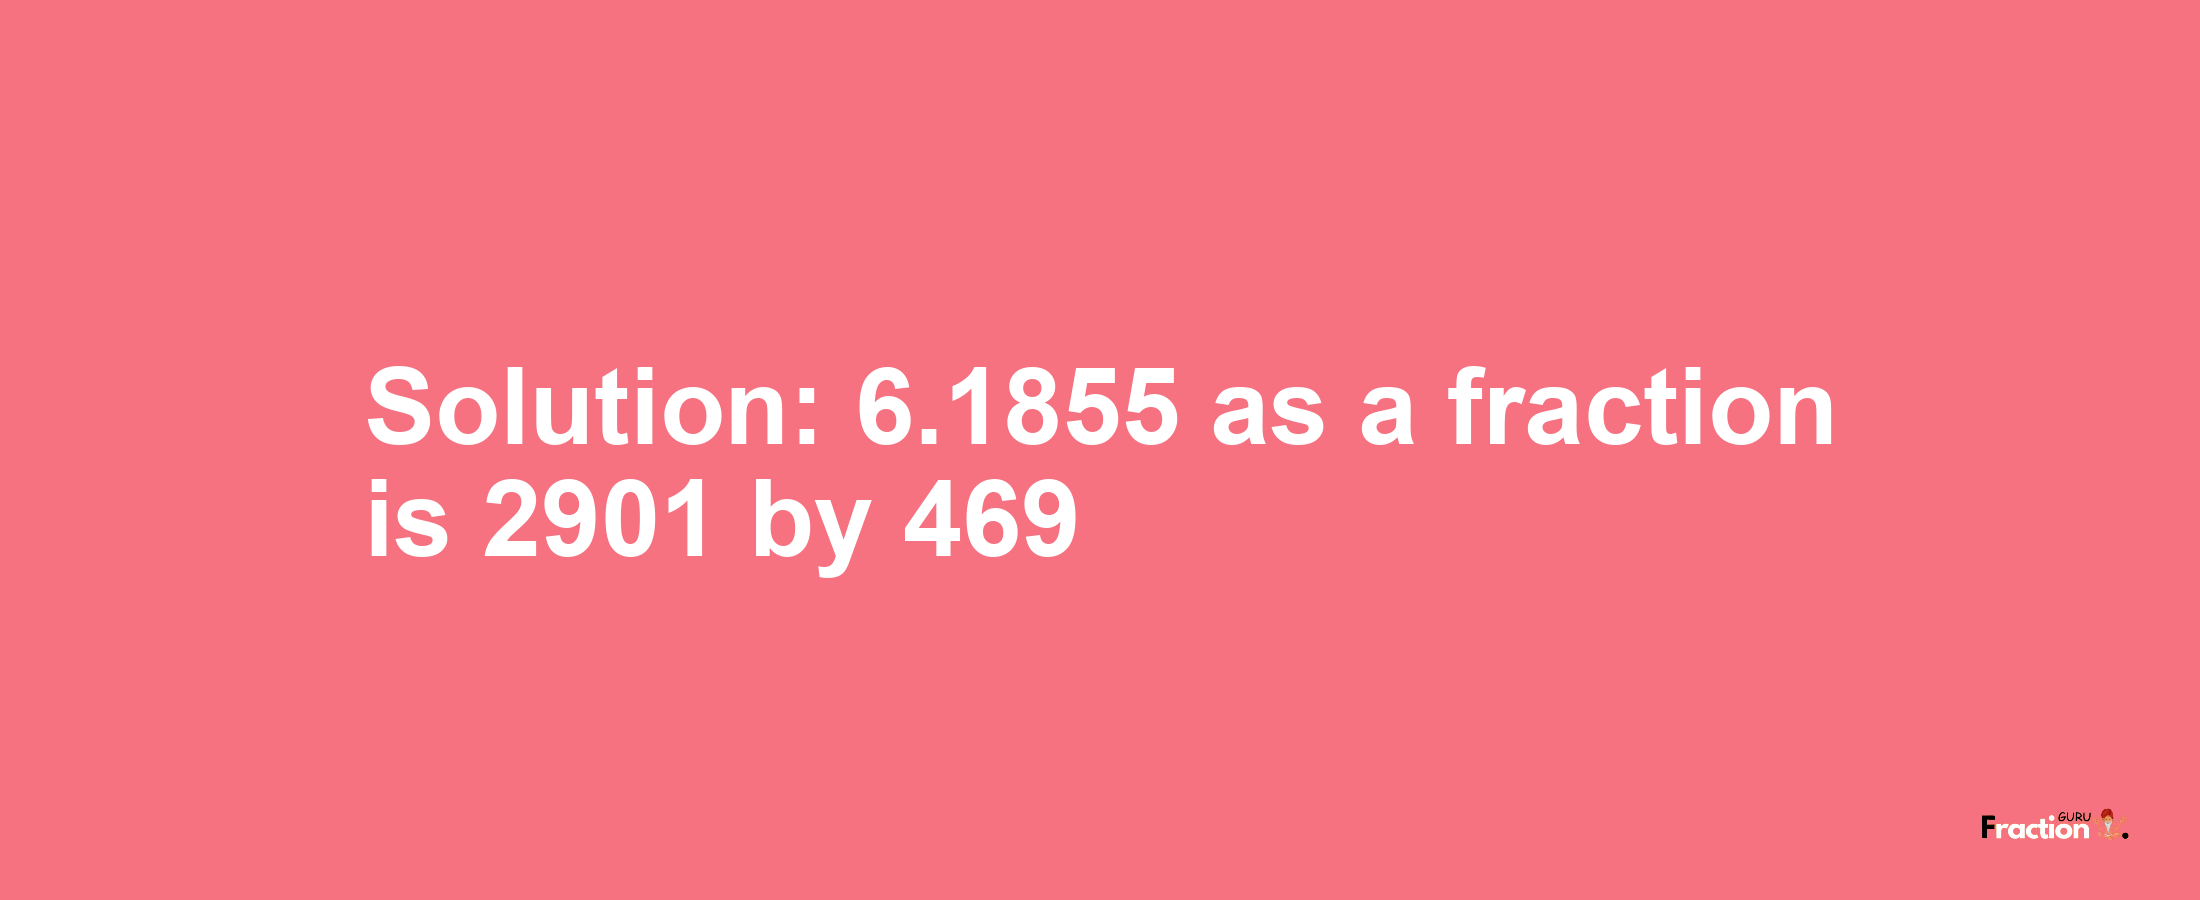 Solution:6.1855 as a fraction is 2901/469